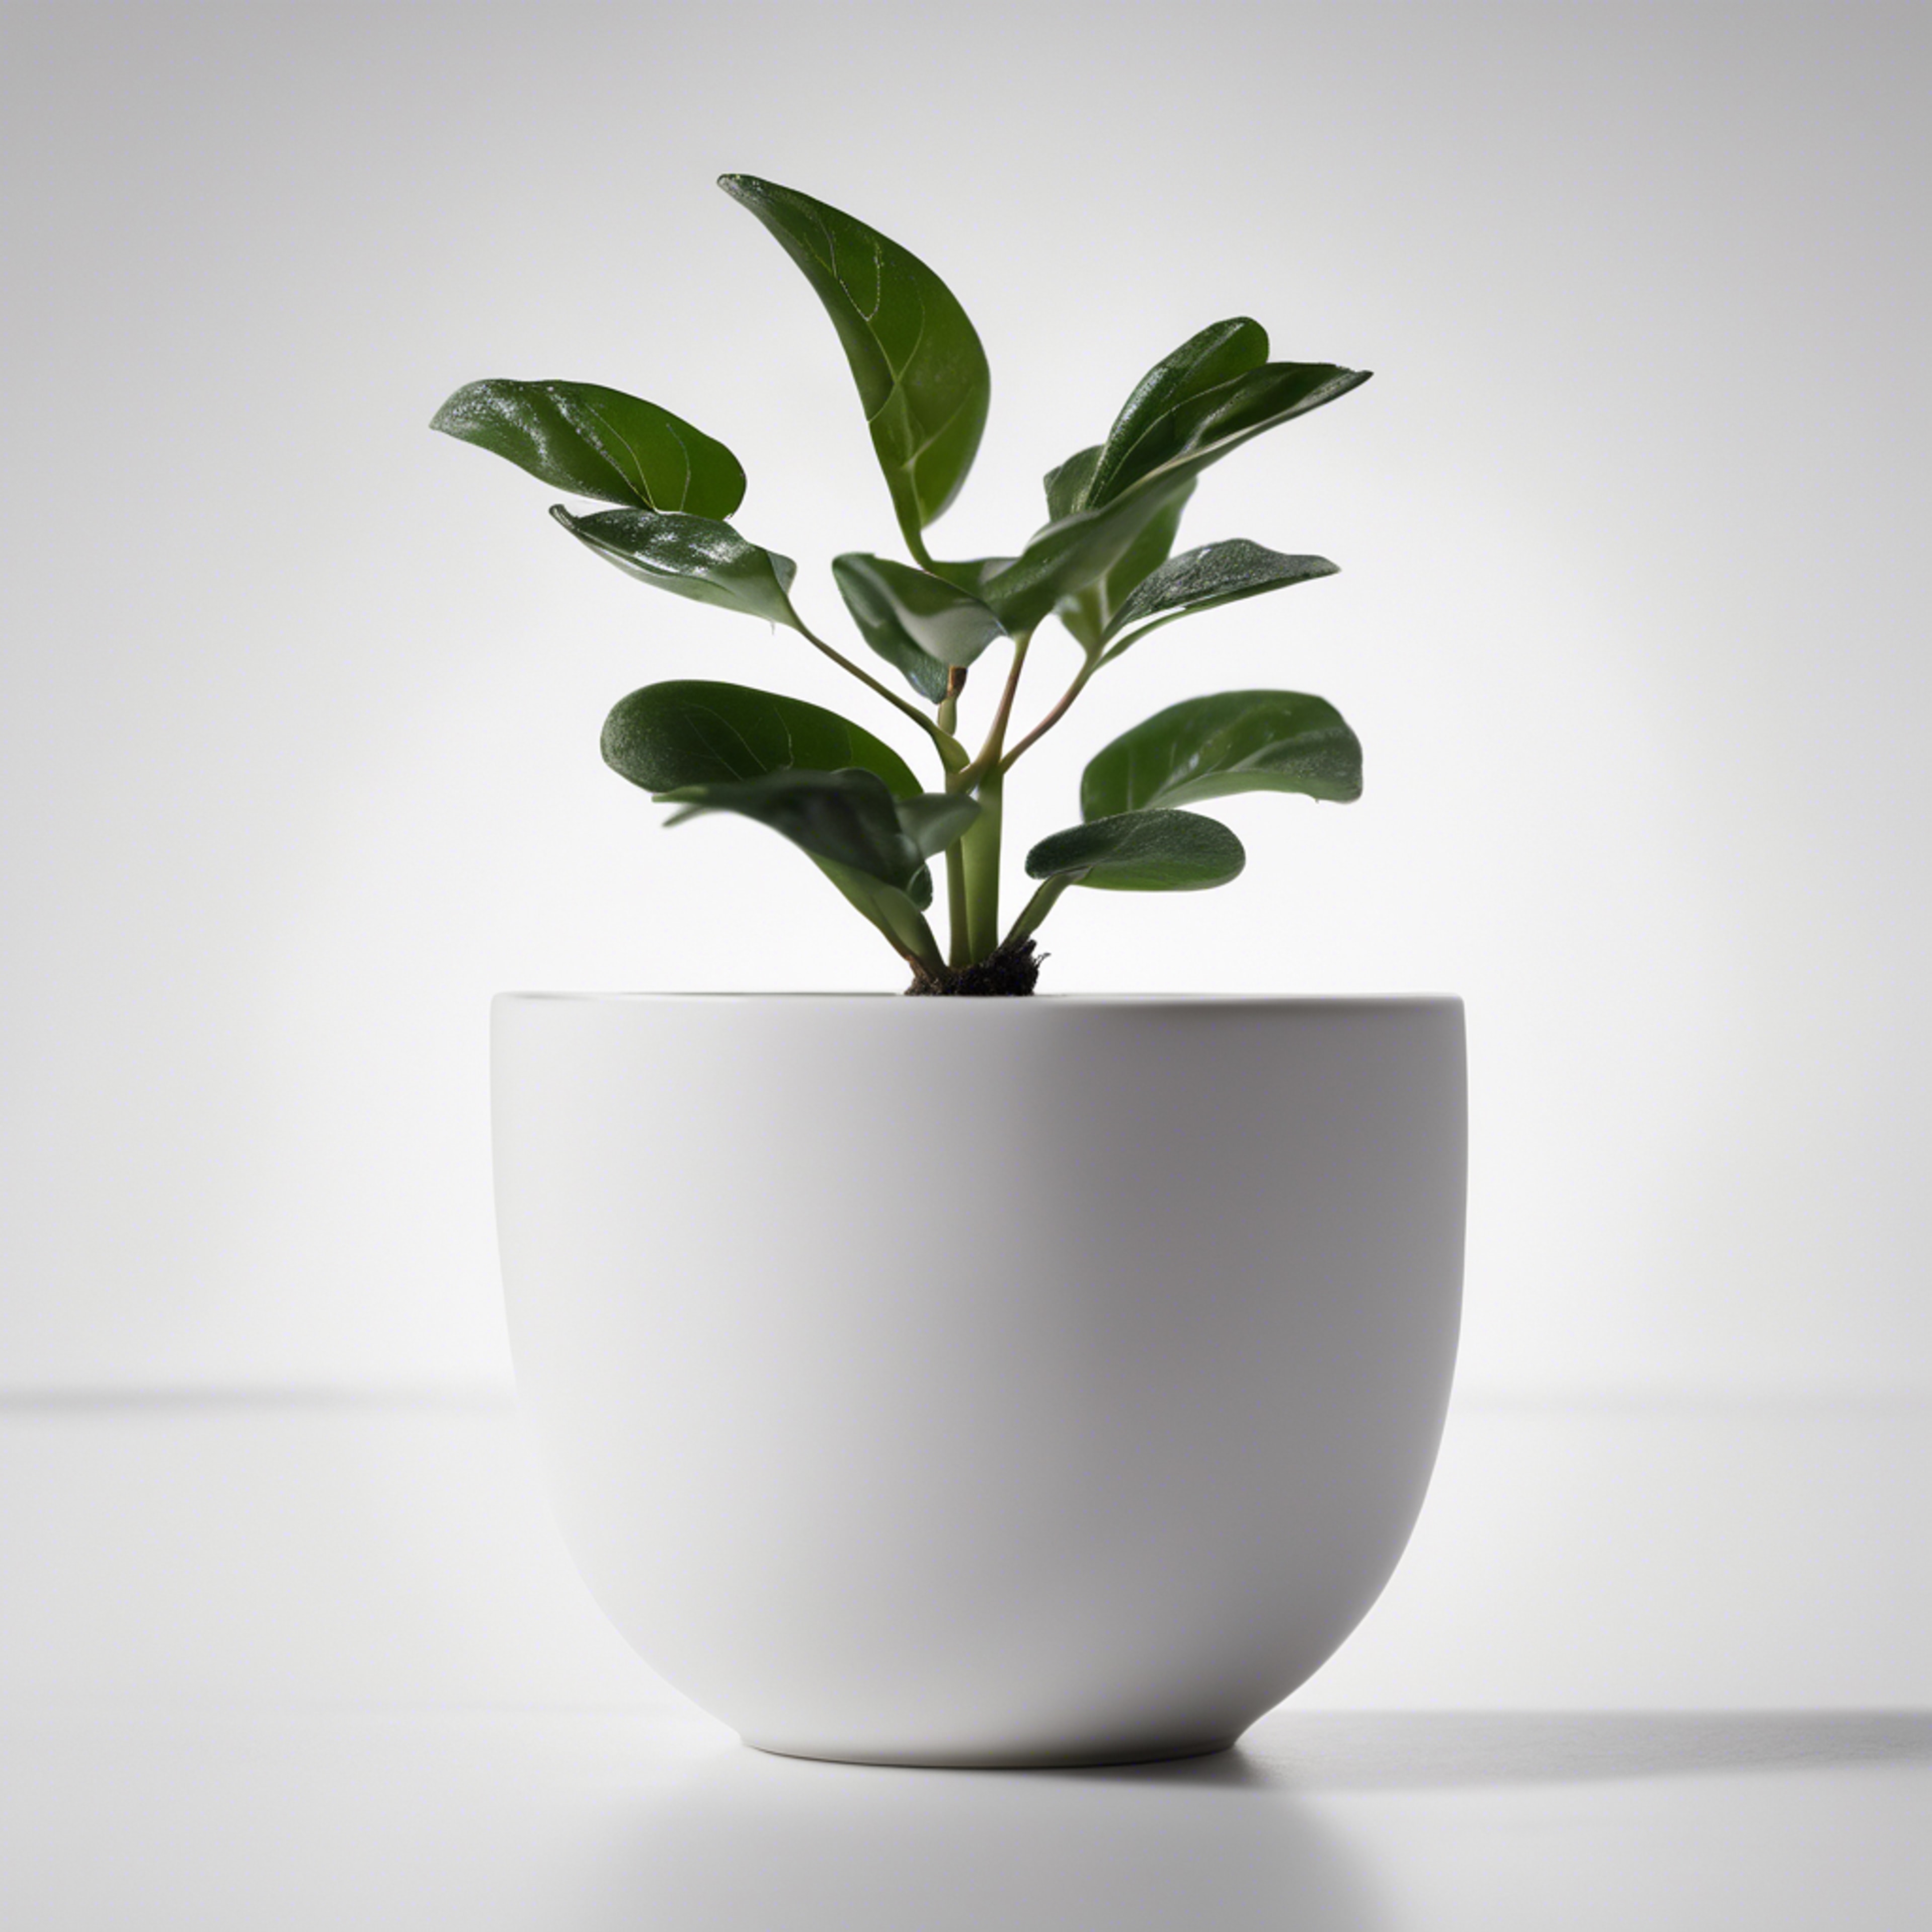 Small plant in a simple white ceramic pot against a minimalist white backdrop. Kertas dinding[a9b2ed4c340742d2b1fd]